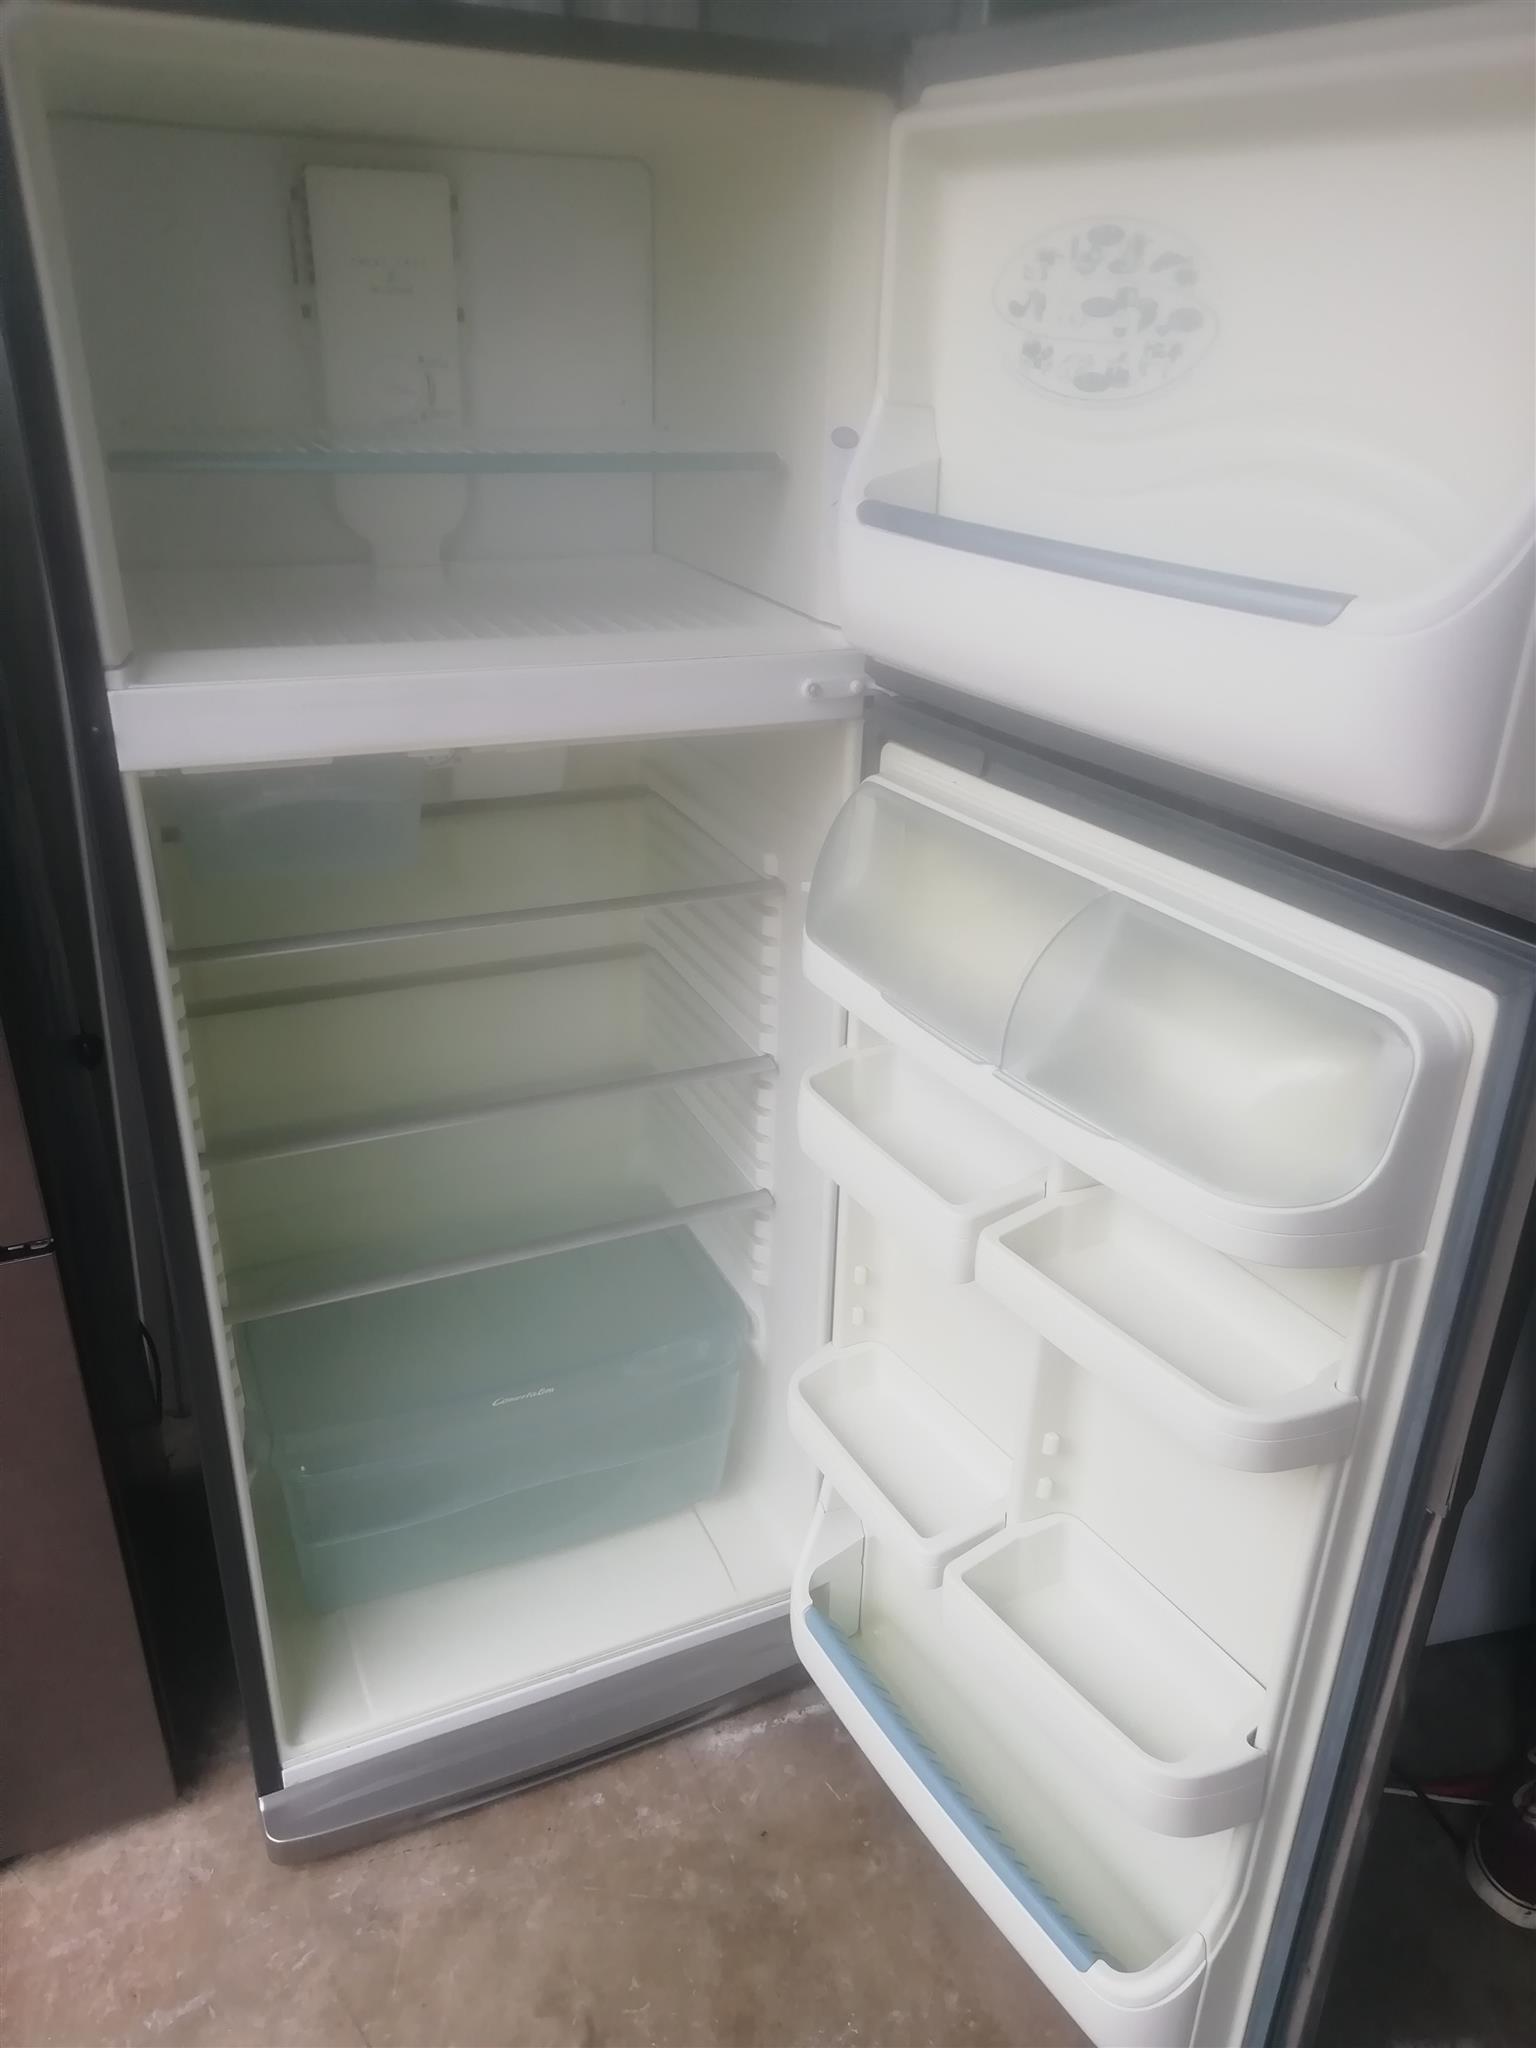 Buying working or non working Fridges and freezer working 